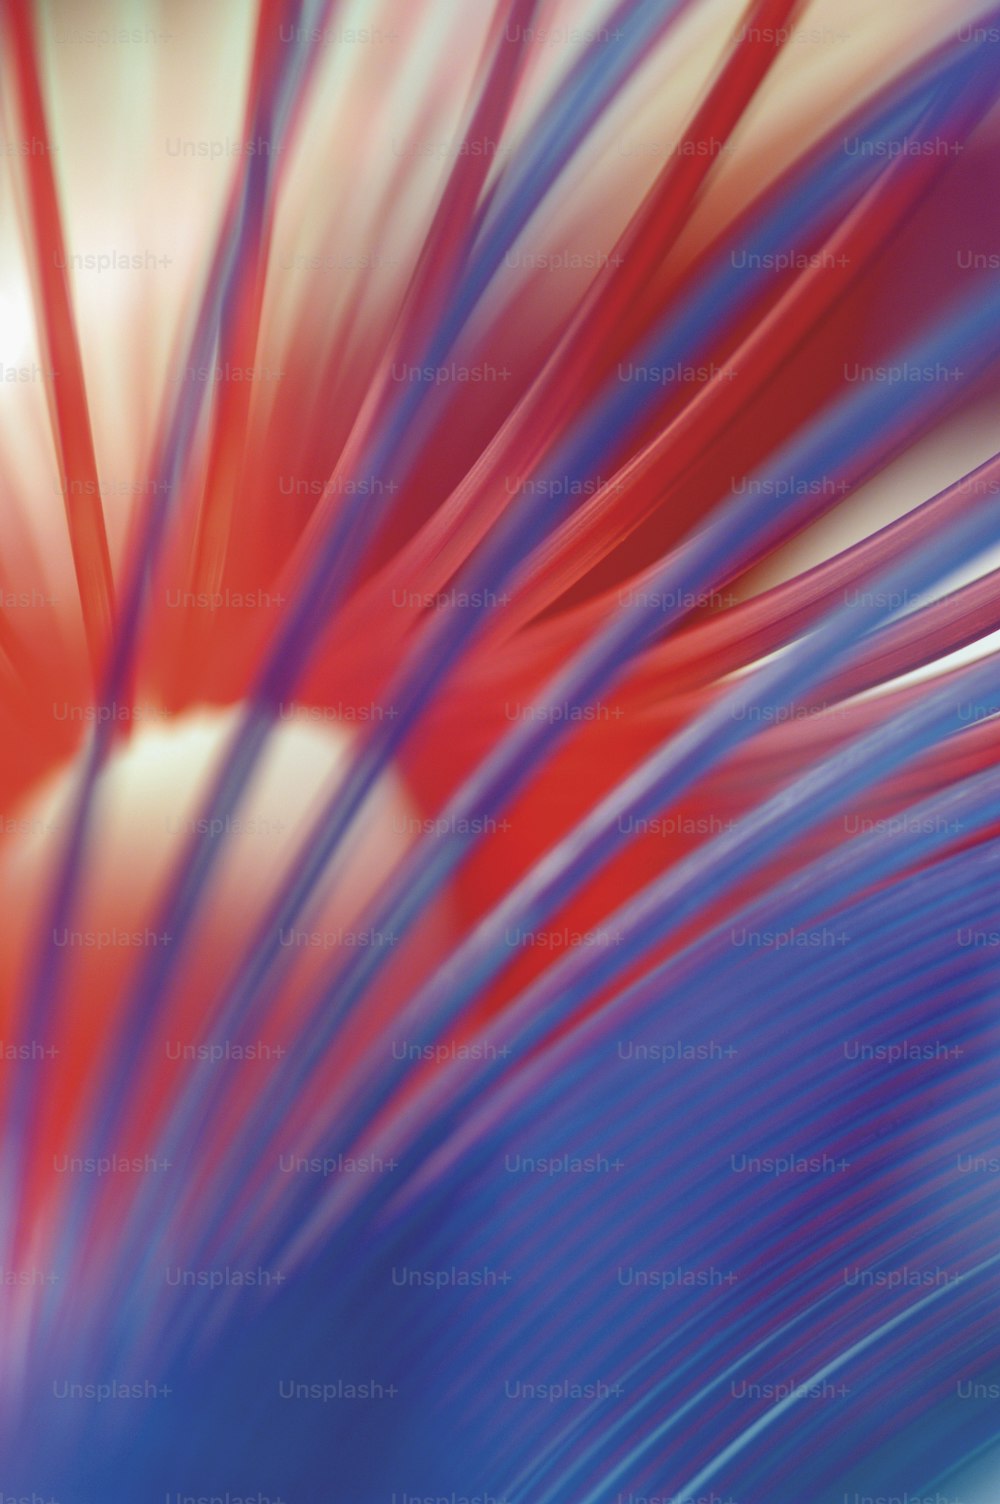 a blurry image of a red and blue object